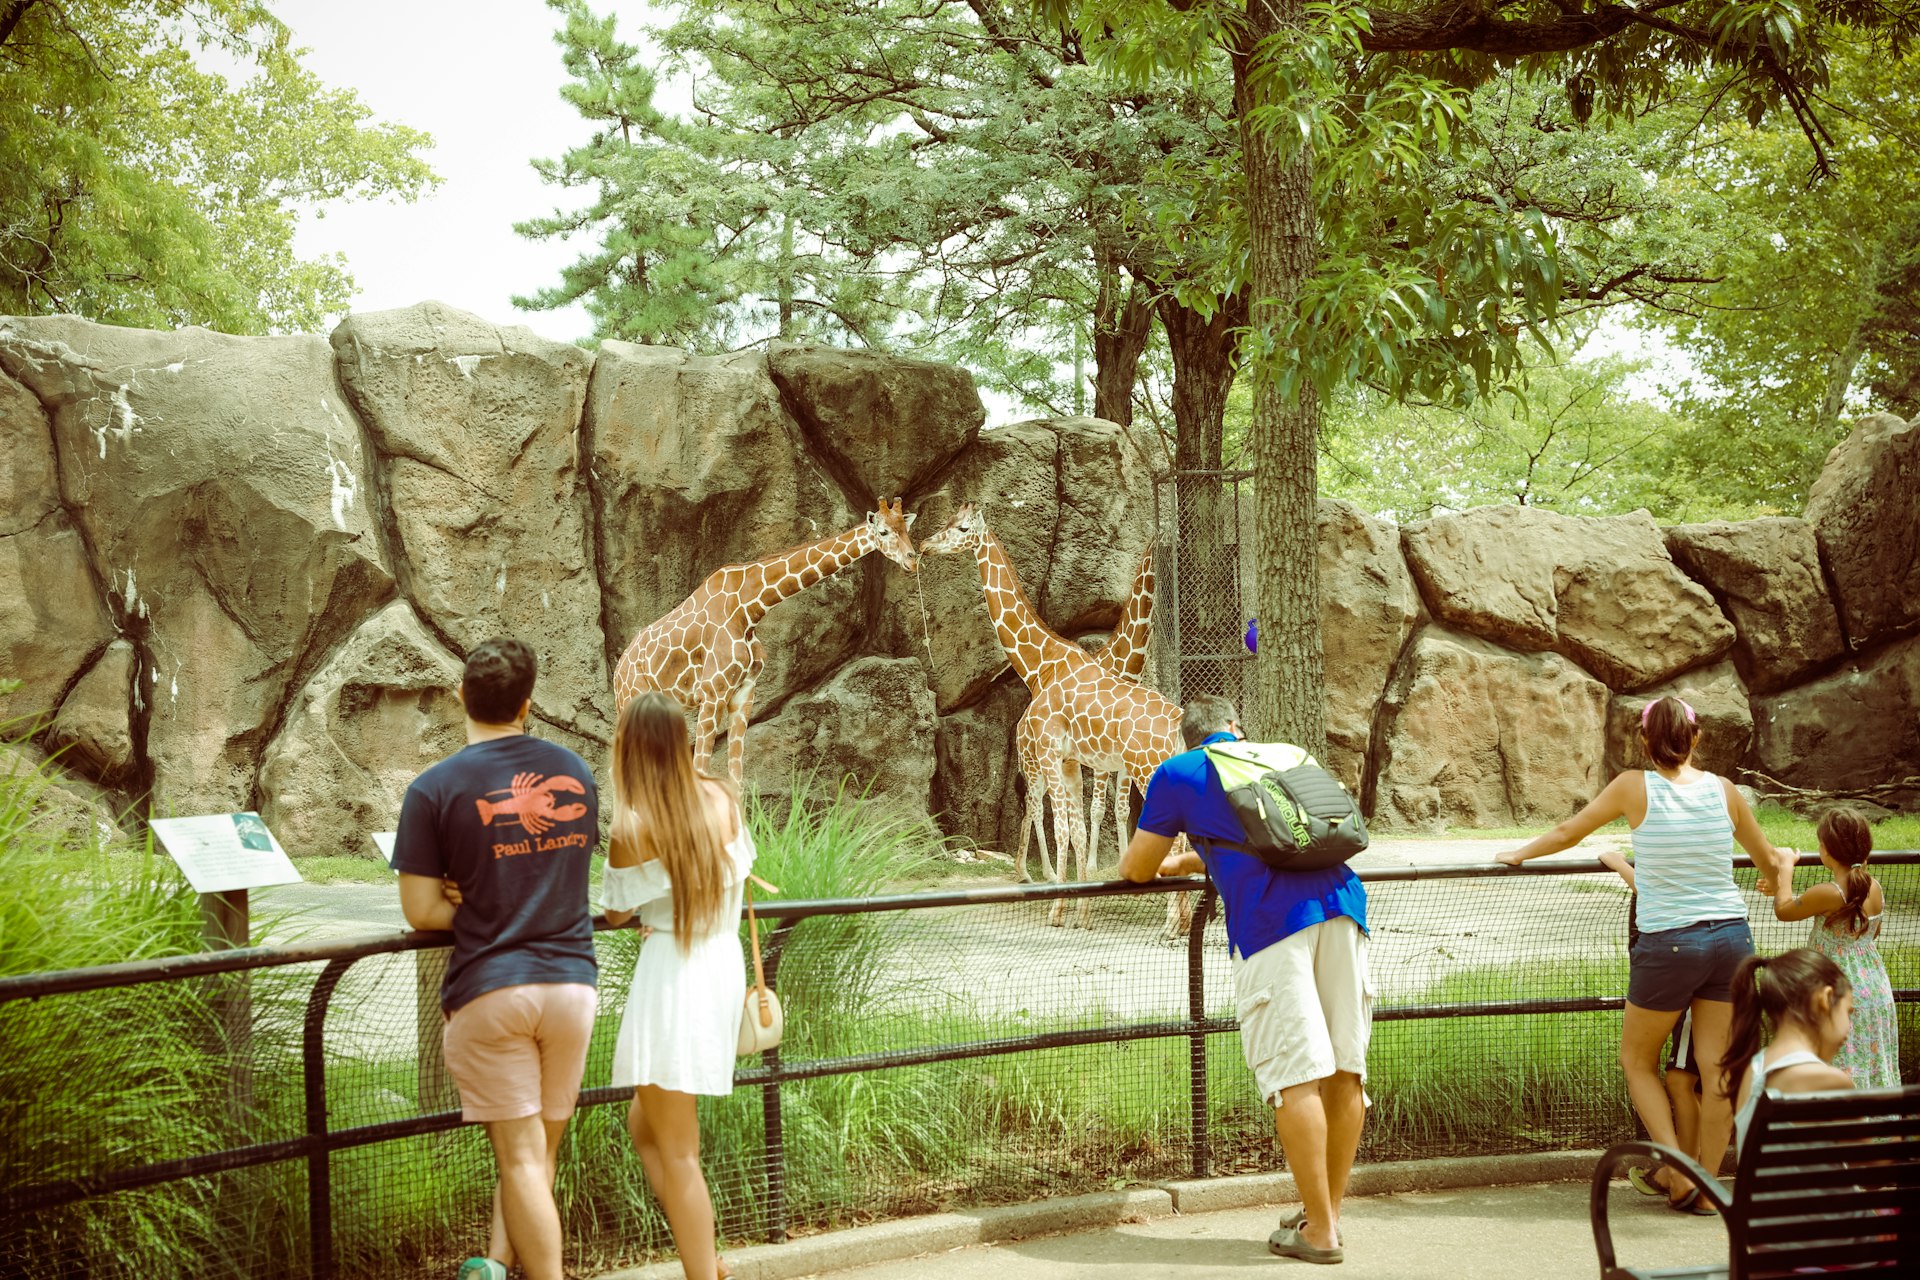 Adults and kids gather in front of an enclosure to look at giraffes, creatures with long legs and long necks